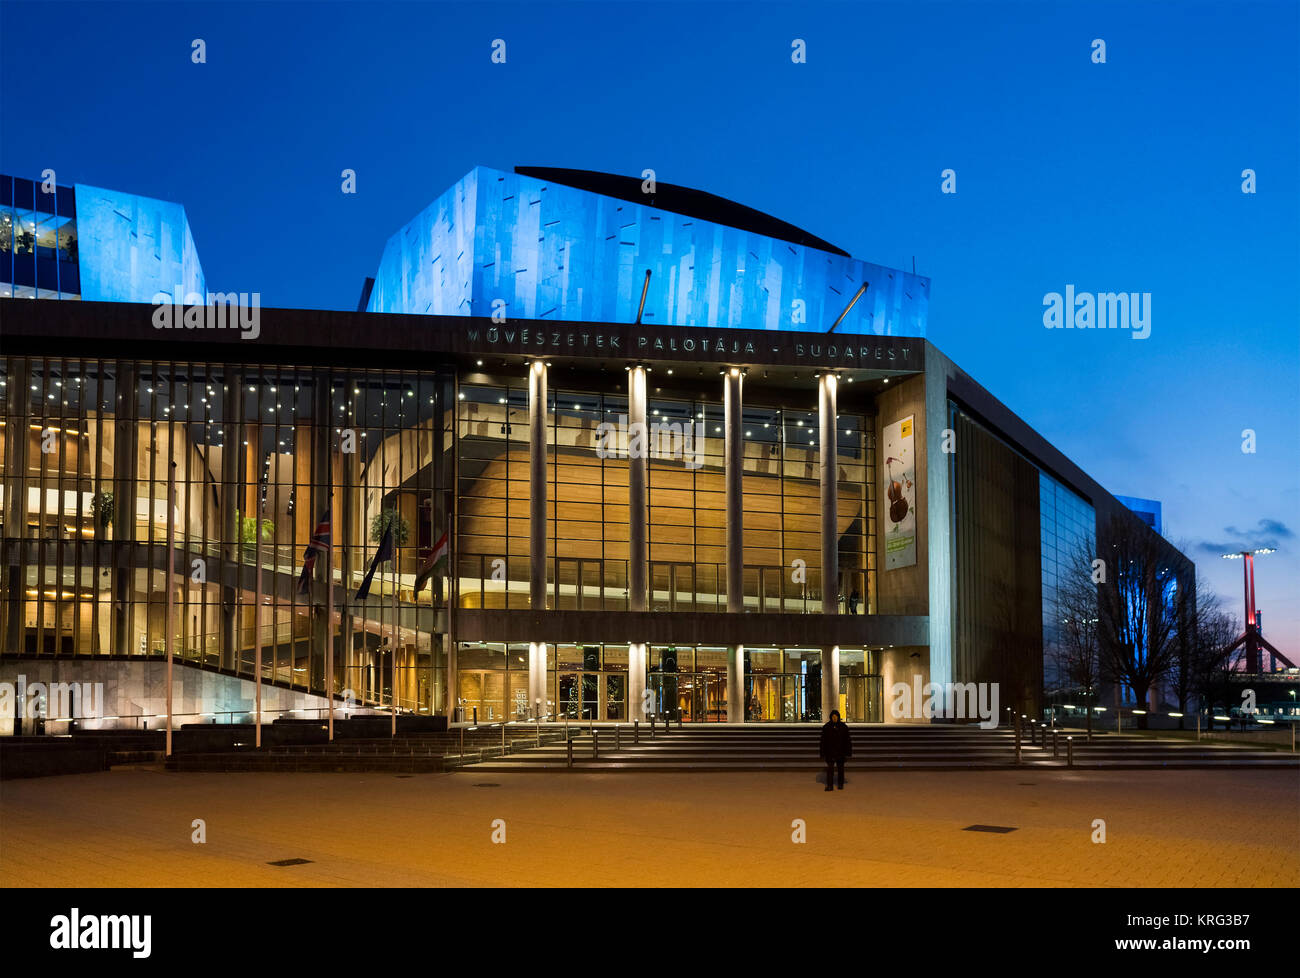 Mupa Budapest Cultural and Art Center at sunset, Budapest, Hungary Stock Photo